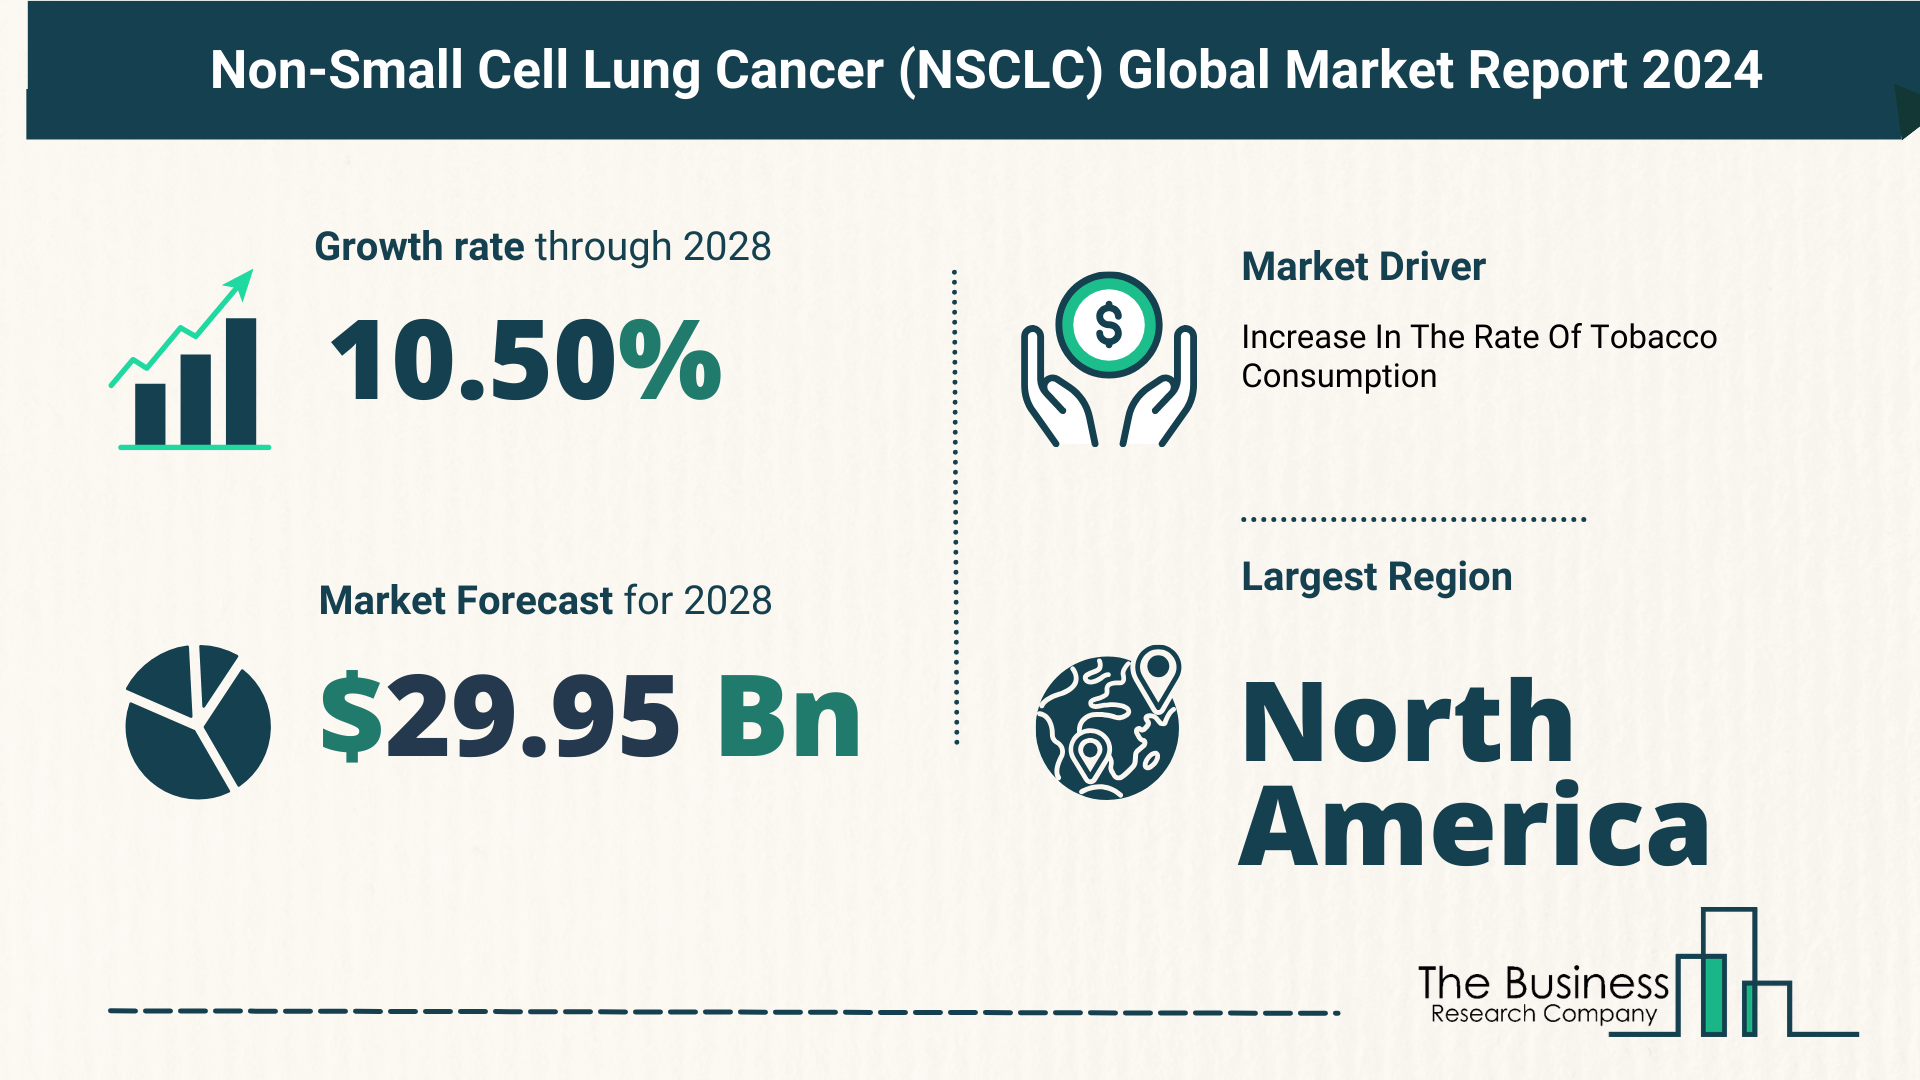 Comprehensive Analysis On Size, Share, And Drivers Of The Non-Small Cell Lung Cancer (NSCLC) Market